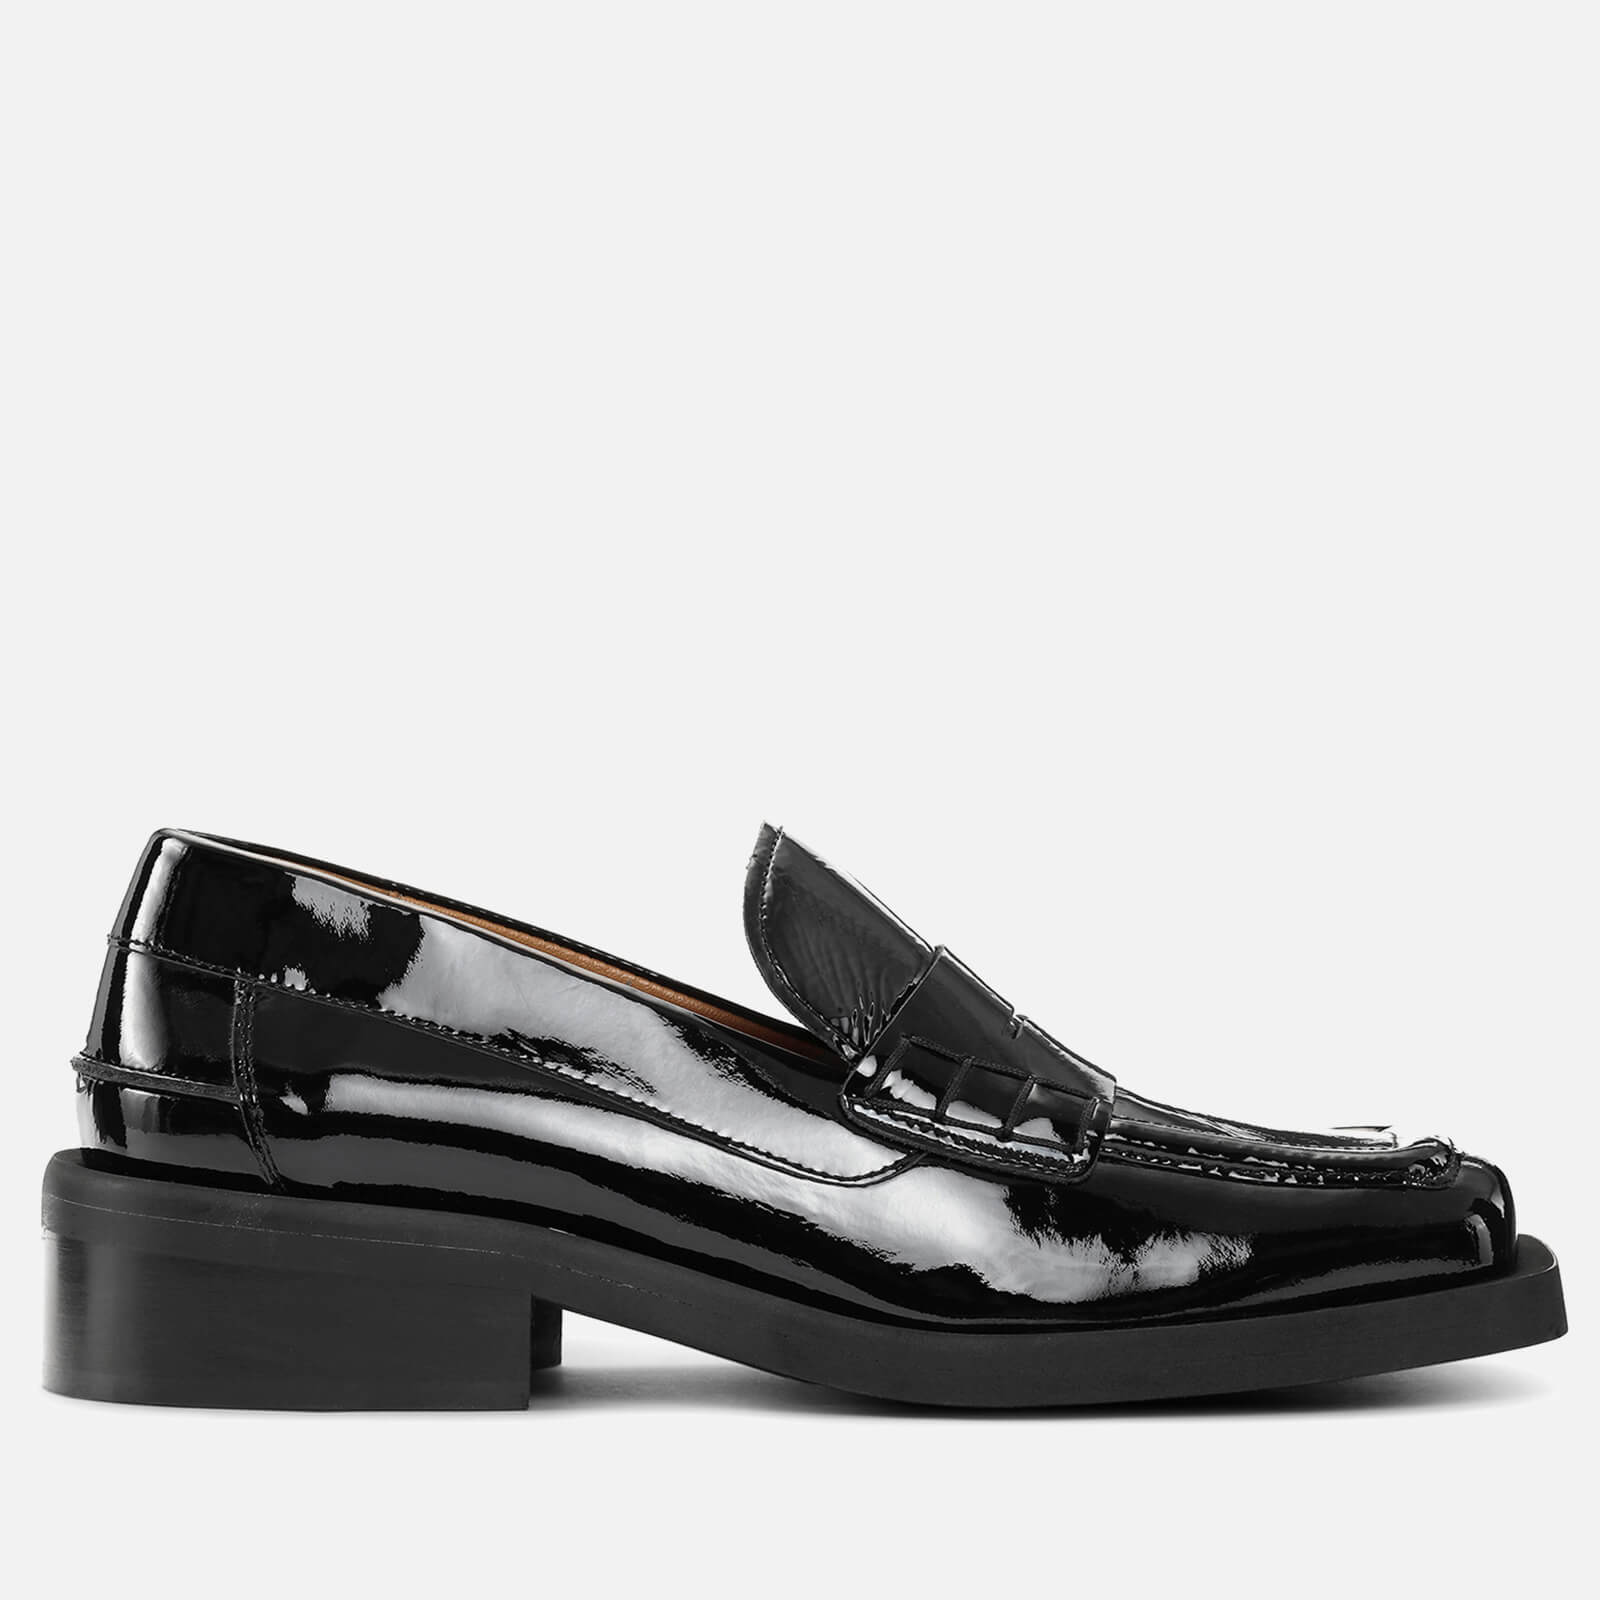 Ganni Women's Patent Leather Loafers - Black - UK 4